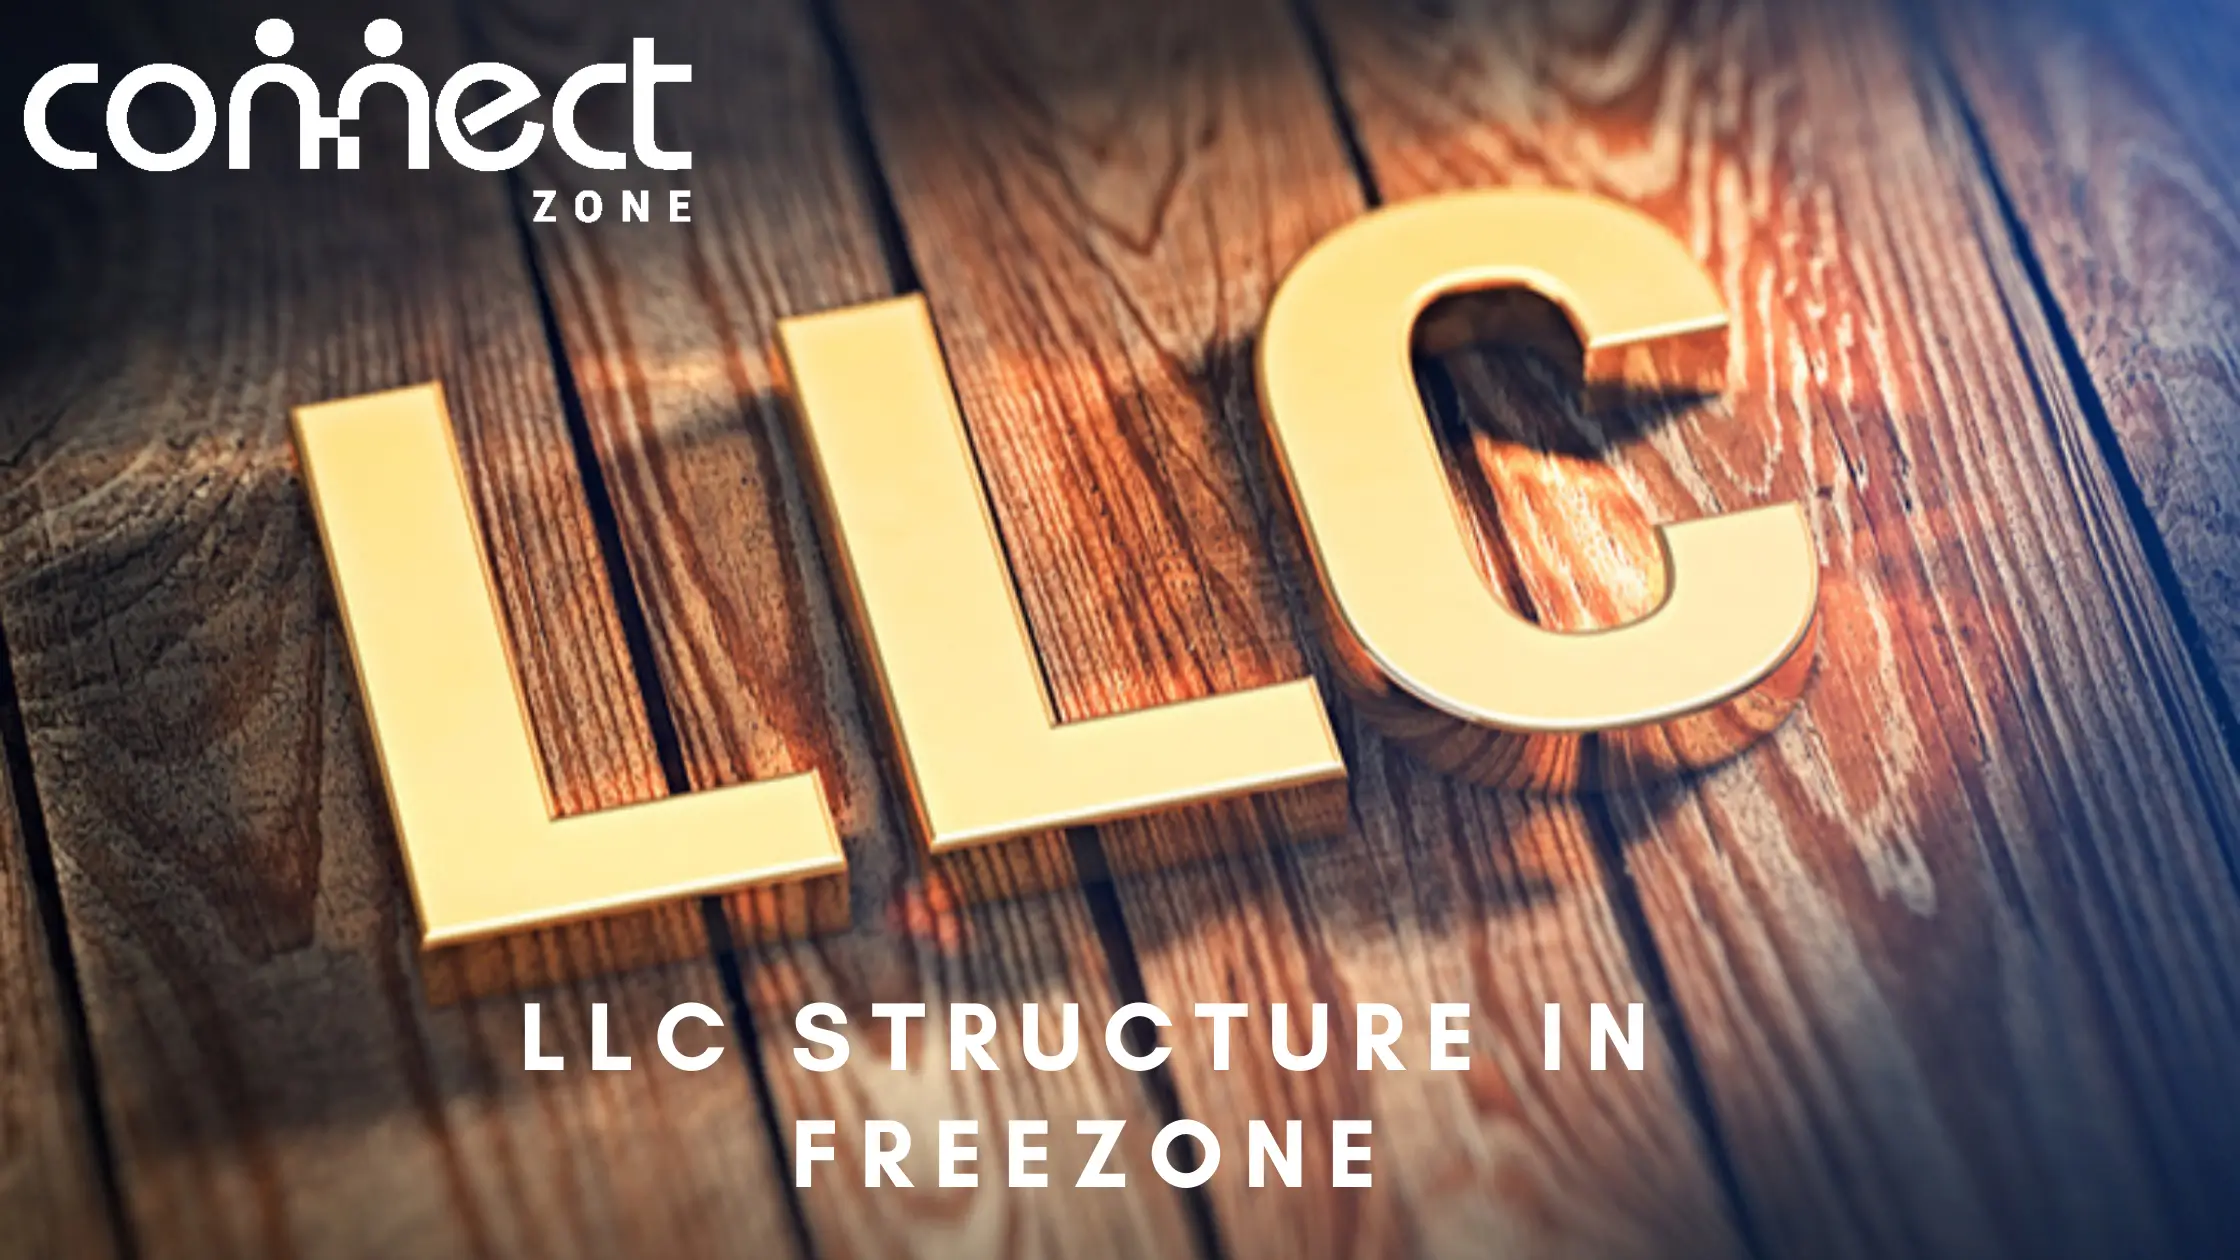 LLC structure in the Free Zone